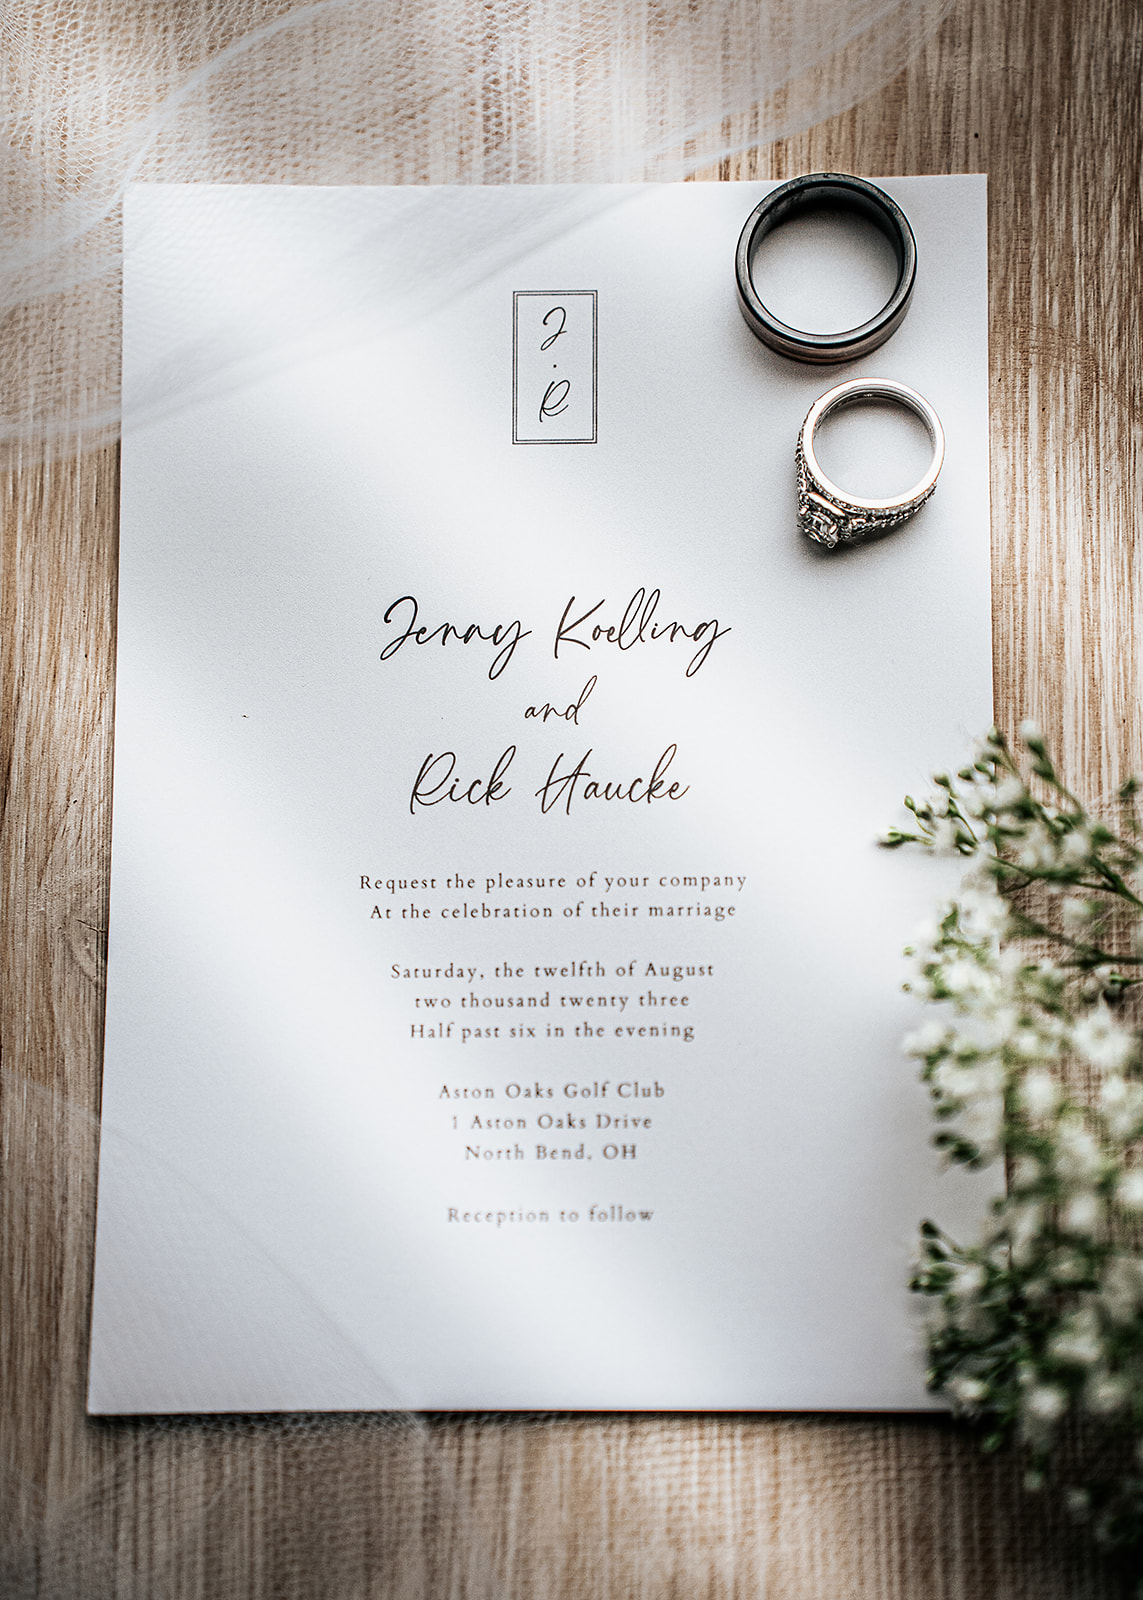 Artistic shot of wedding invitation with directional light